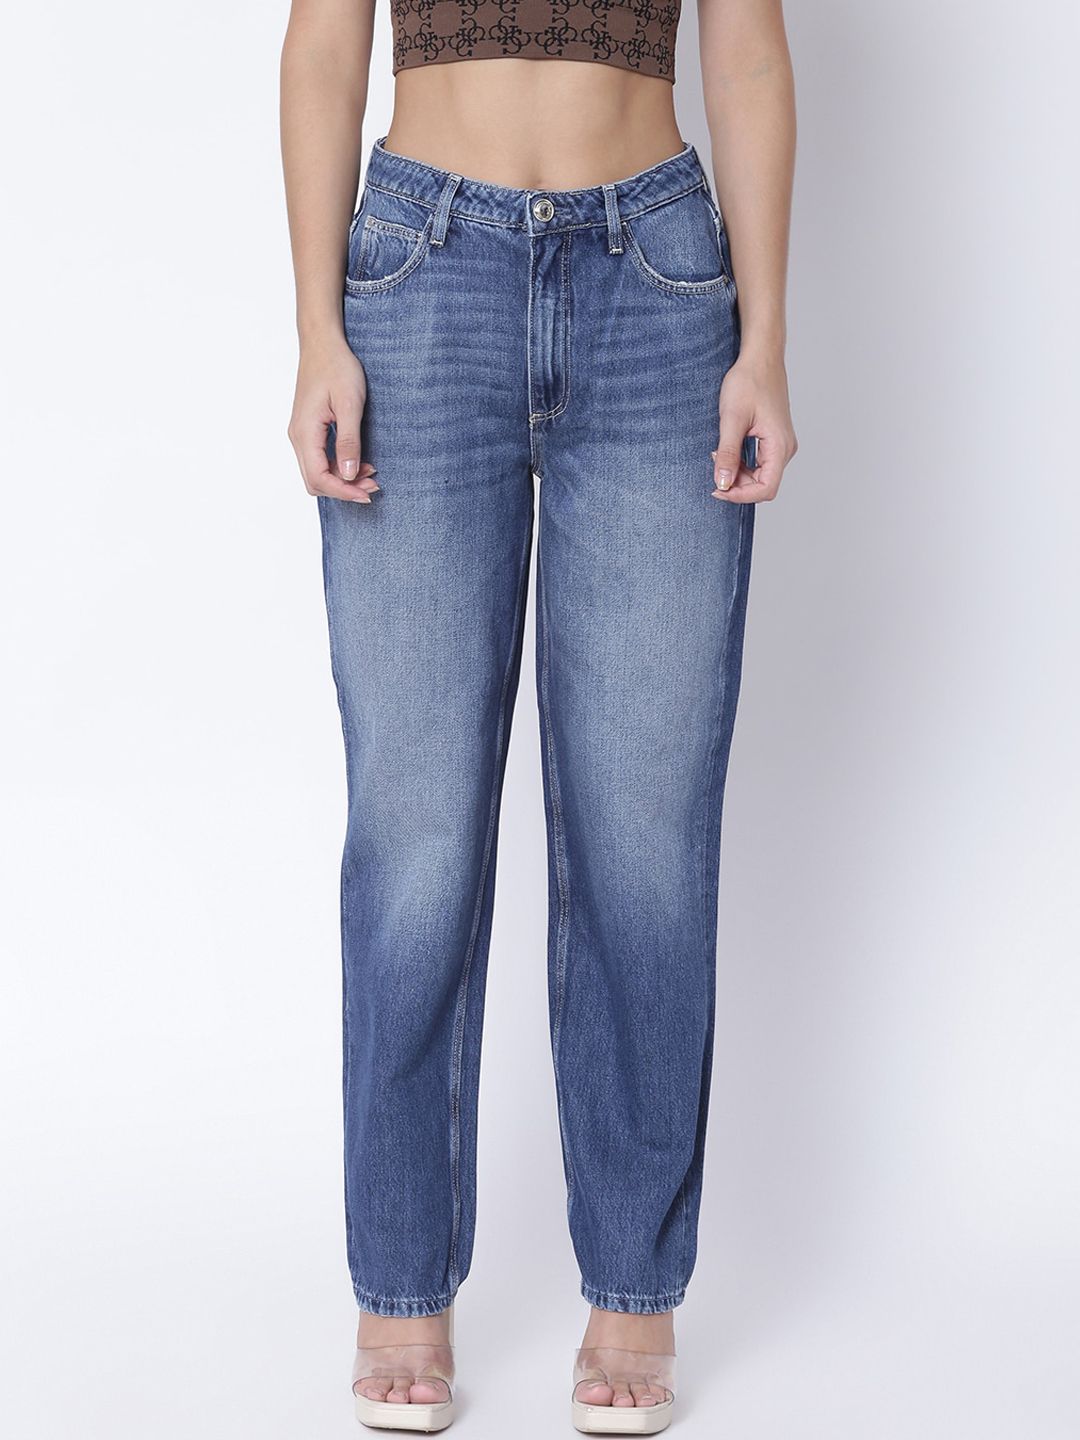 GUESS Women Blue Light Fade Cotton Jeans Price in India